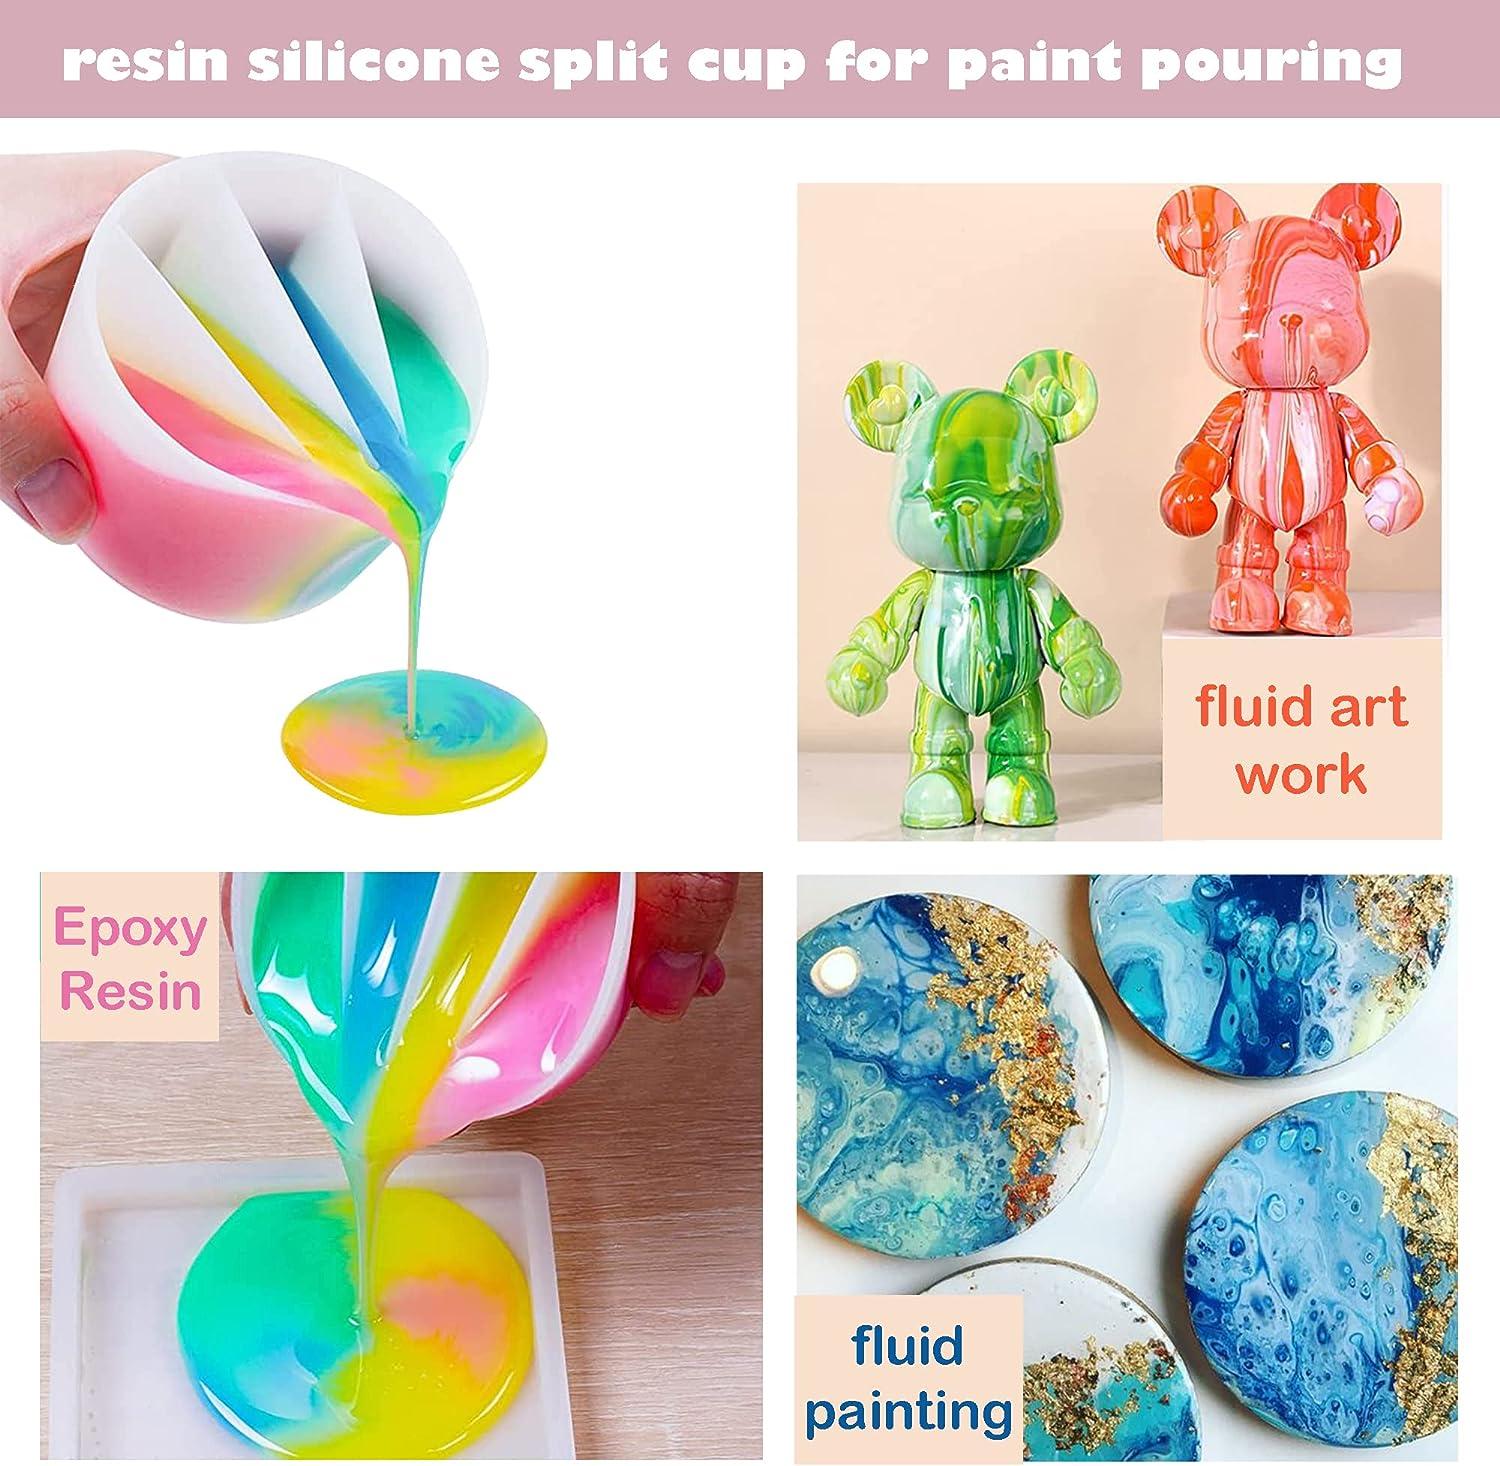 Ycolew Silicone Craft Mat, Silicone Mat for Resin Casting, 17x15Non Stick  Silicone Sheet, Creator Silicone Craft Mat with Cleaning Cup for Painting,  Art, Clay and Play Doh 